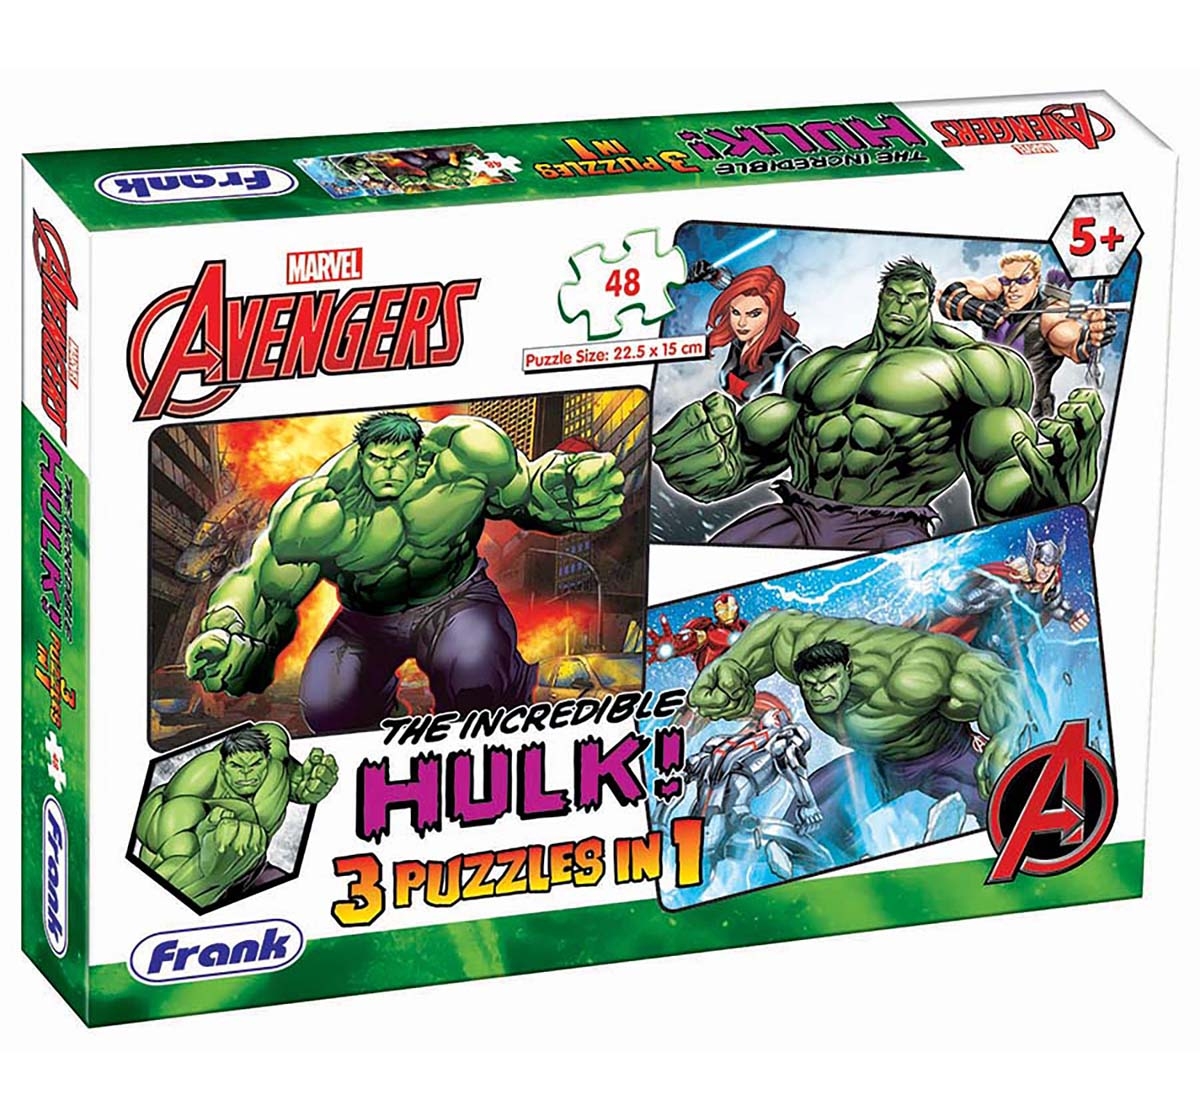 Frank | Frank Avengers The Incredible Hulk! 3 In 1 Puzzle Puzzles for Kids Age 5Y+